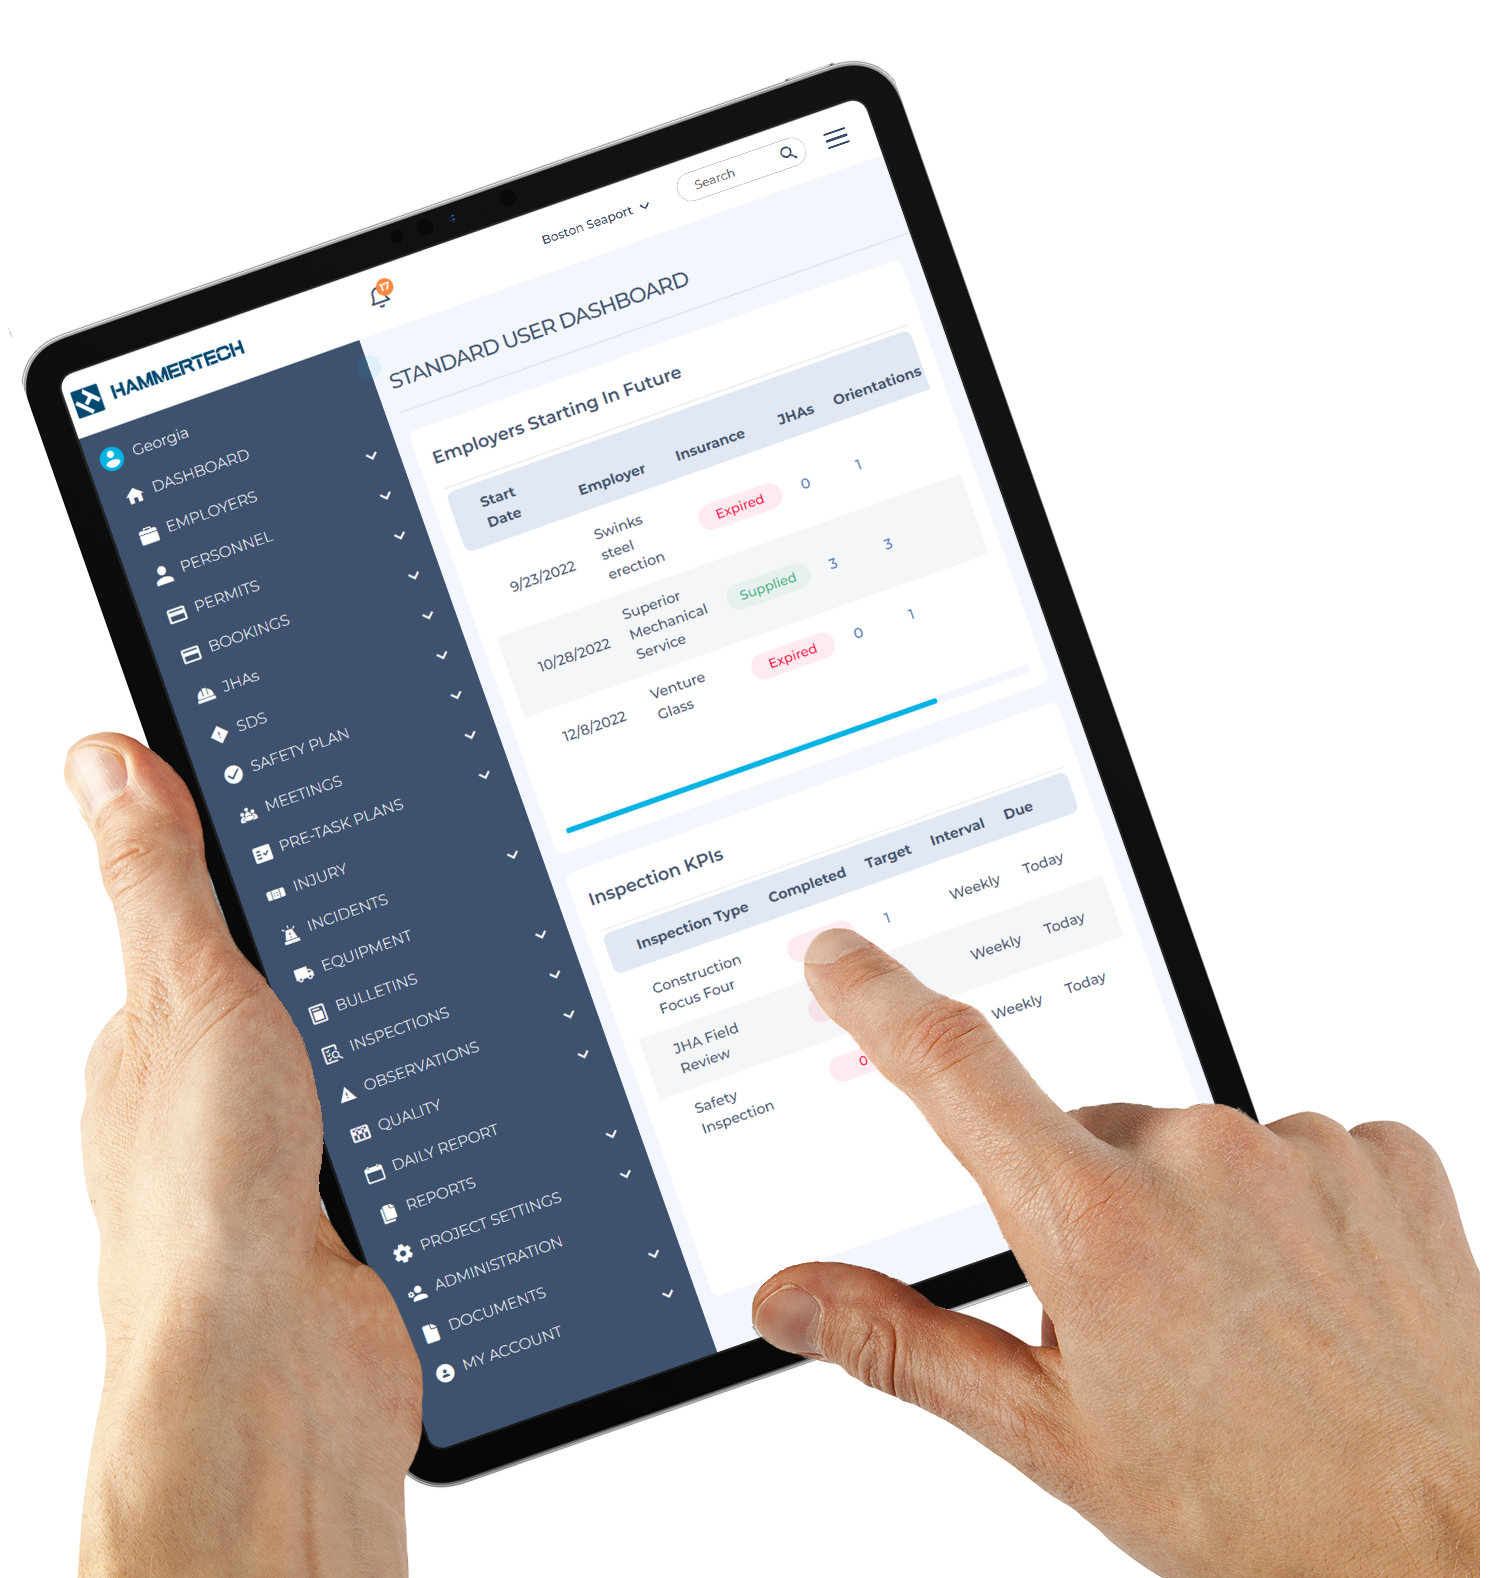 Contractor uses HammerTech's EHS platform on a tablet for comprehensive safety management, including Orientations, Safety Plan, Reporting, Incident and Injury, SDS, Inspections, Covid Support, Permits, Sign-In/Out, Meetings, Equipment Monitoring, and Defect Reporting.